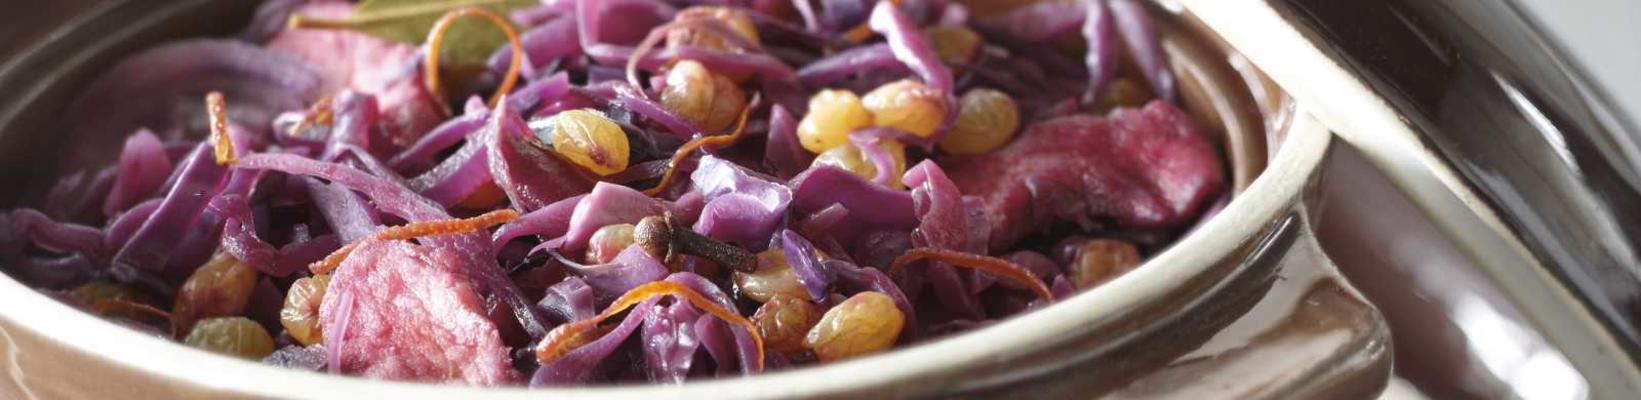 red cabbage with apples, raisins and orange peel